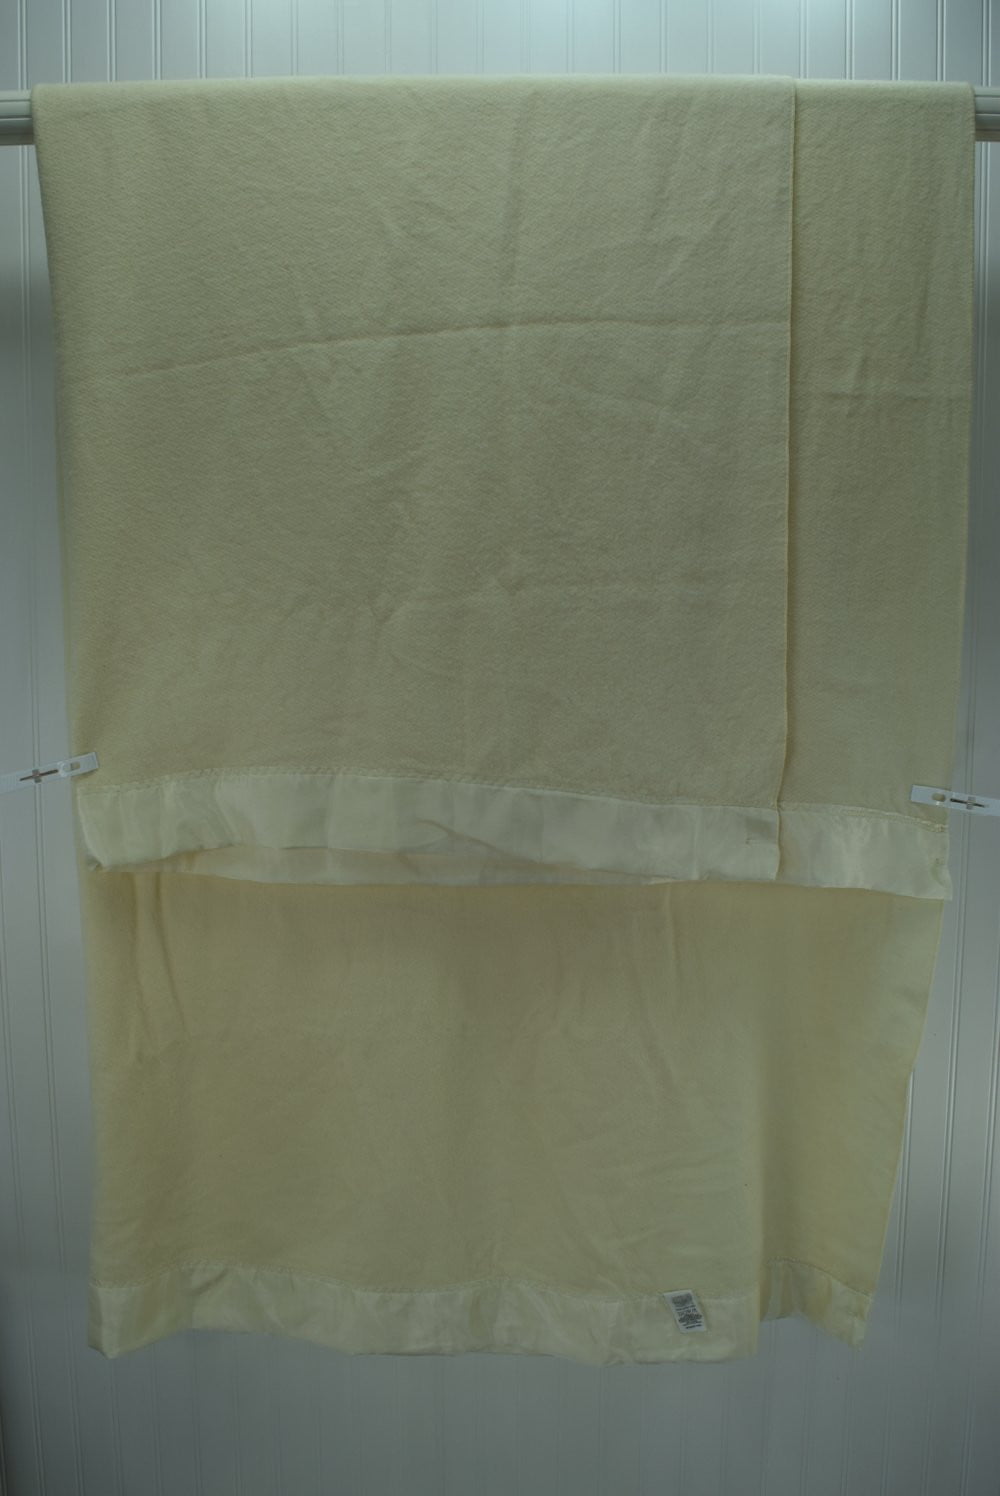 Acrylic 100% Blanket for sale Ivory Off White USA Made 65" X 84" vintage